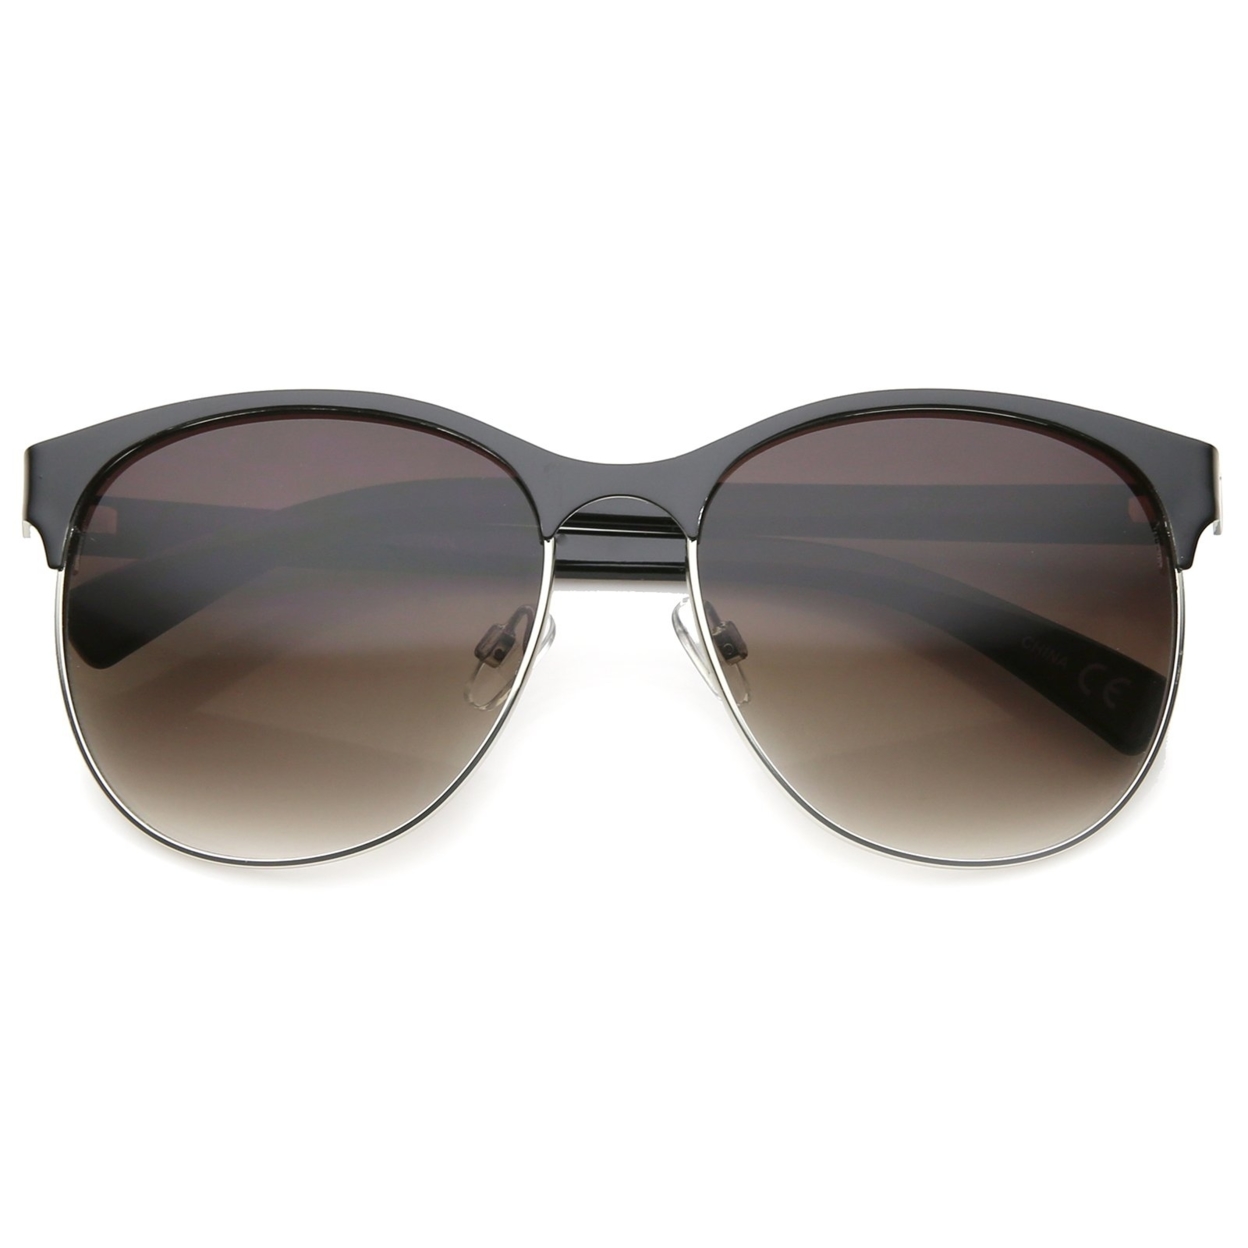 Women's Fashion Two Toned Tinted Lens Half-Frame Round Sunglasses 55mm - Black-Gold / Smoke